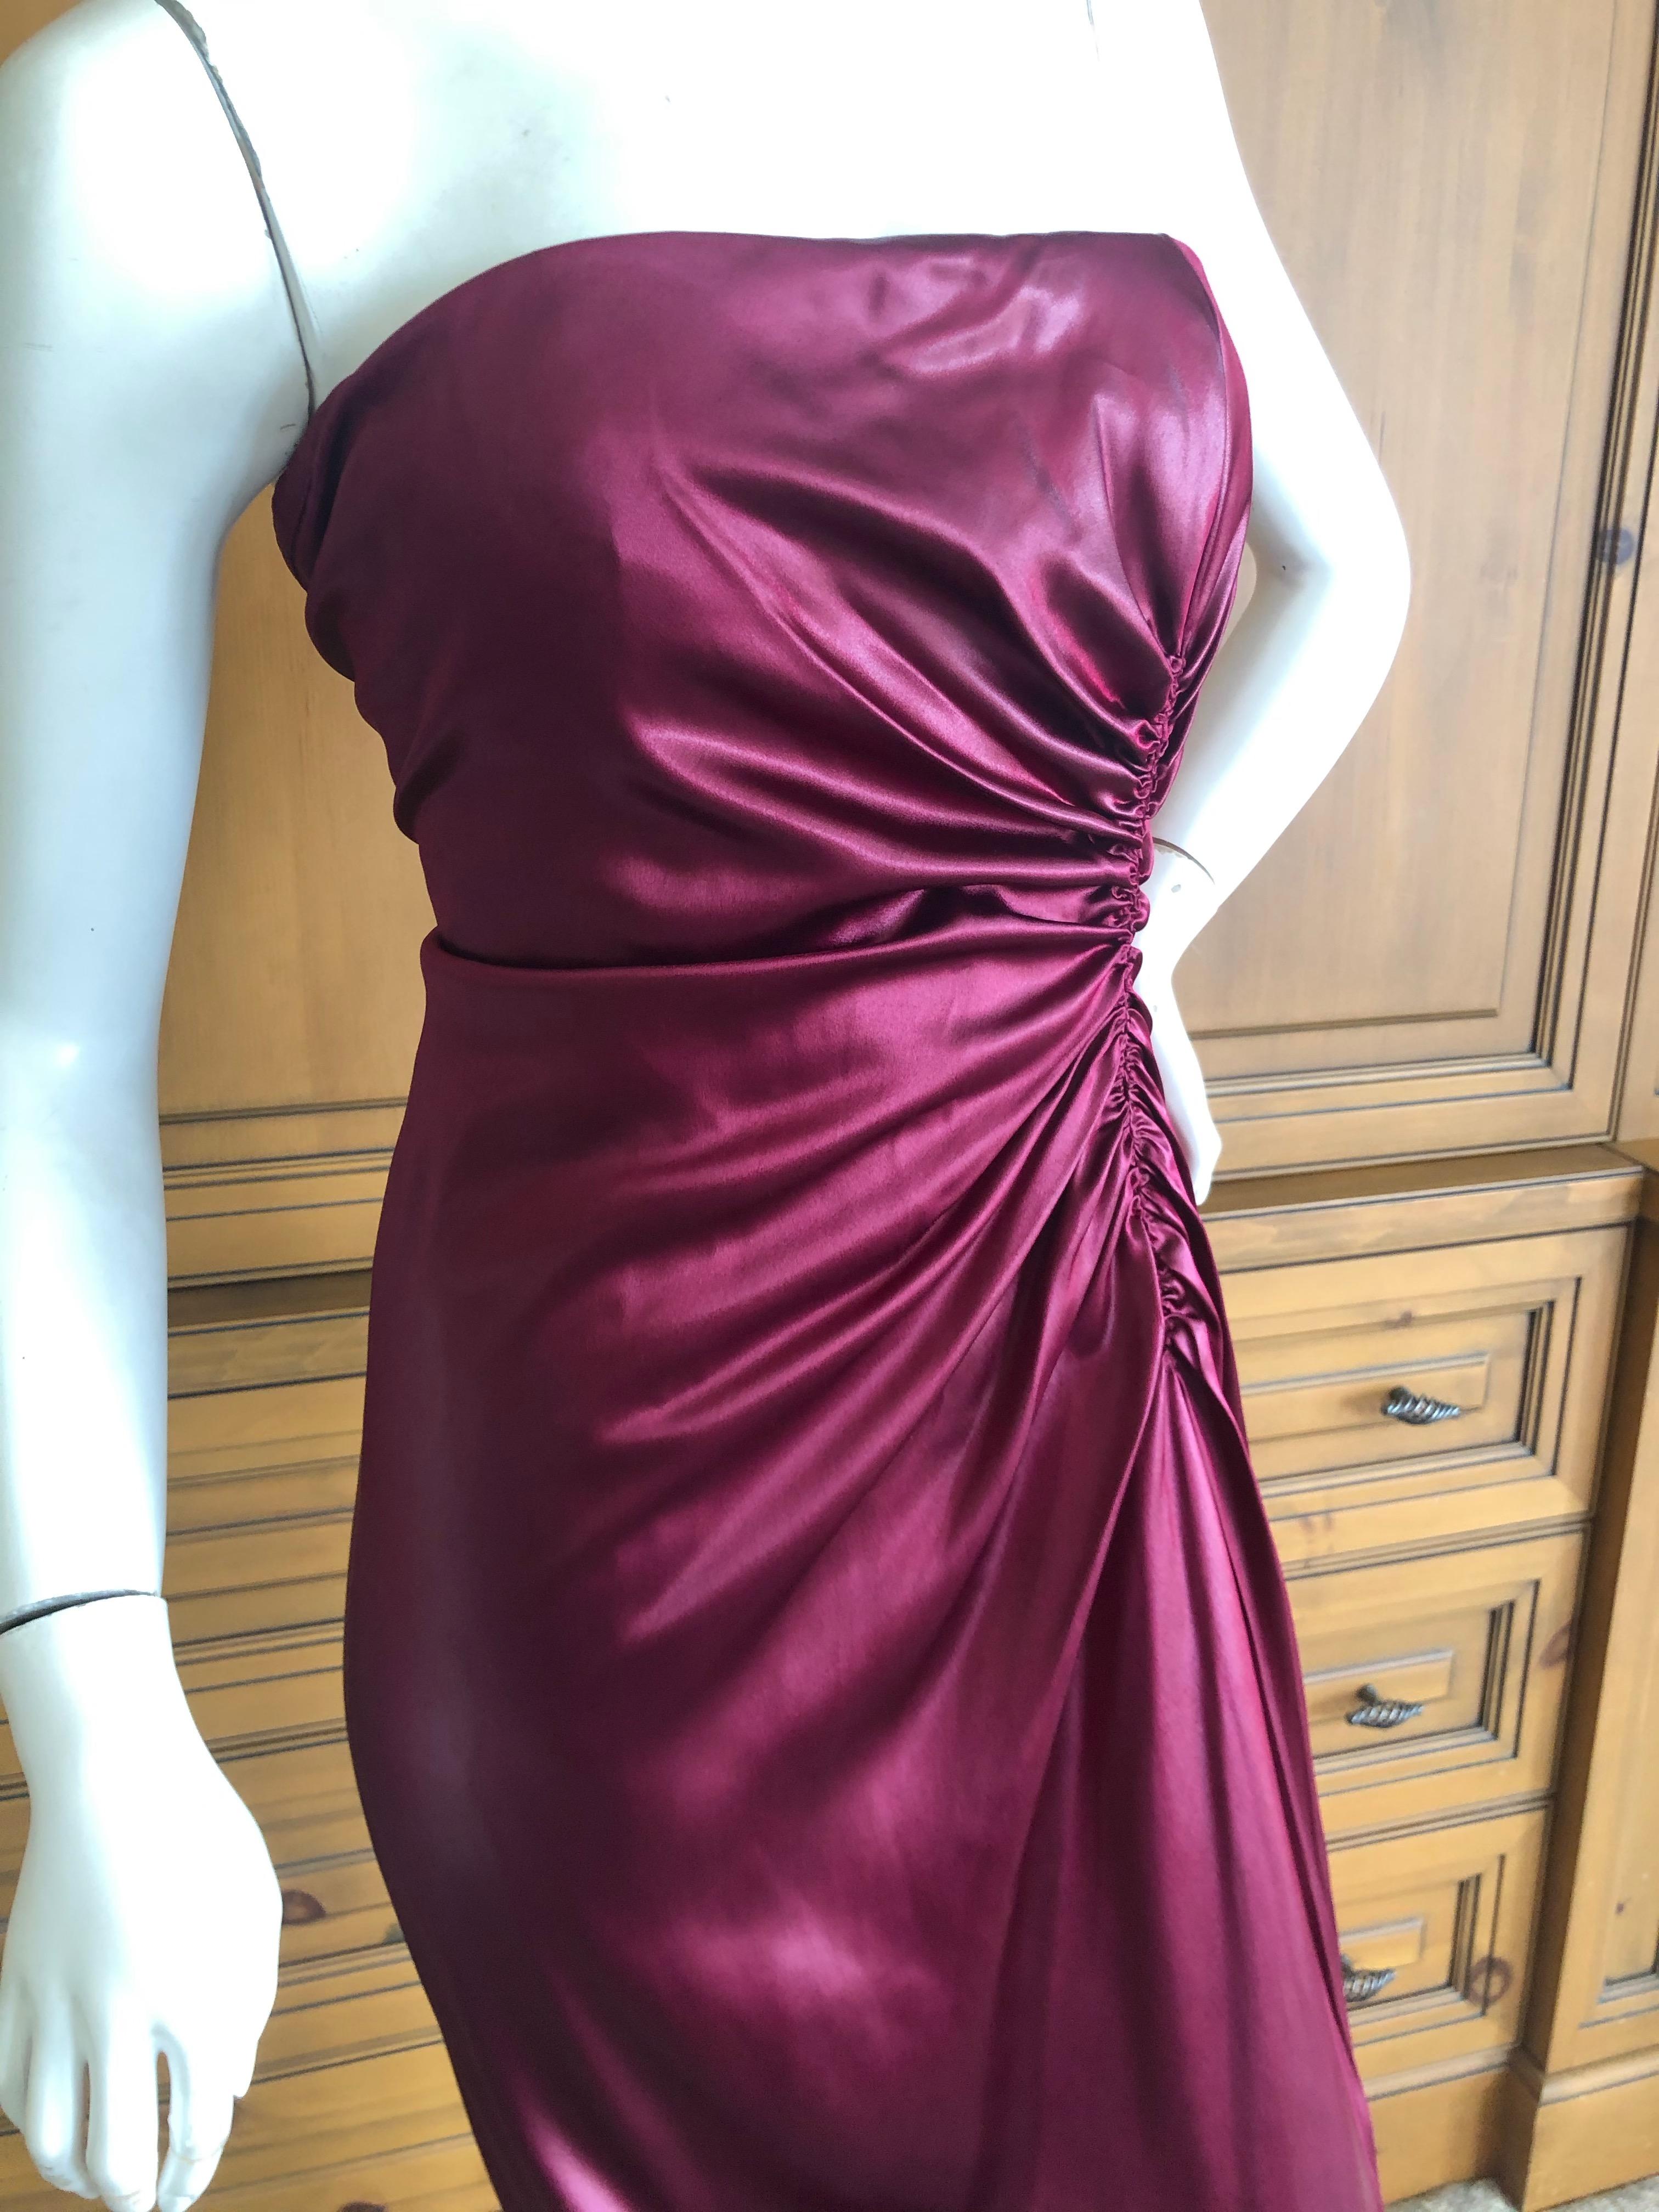 Oscar de la Renta Vintage 80's Strapless Red Evening Dress with Built in Corset  In Good Condition For Sale In Cloverdale, CA